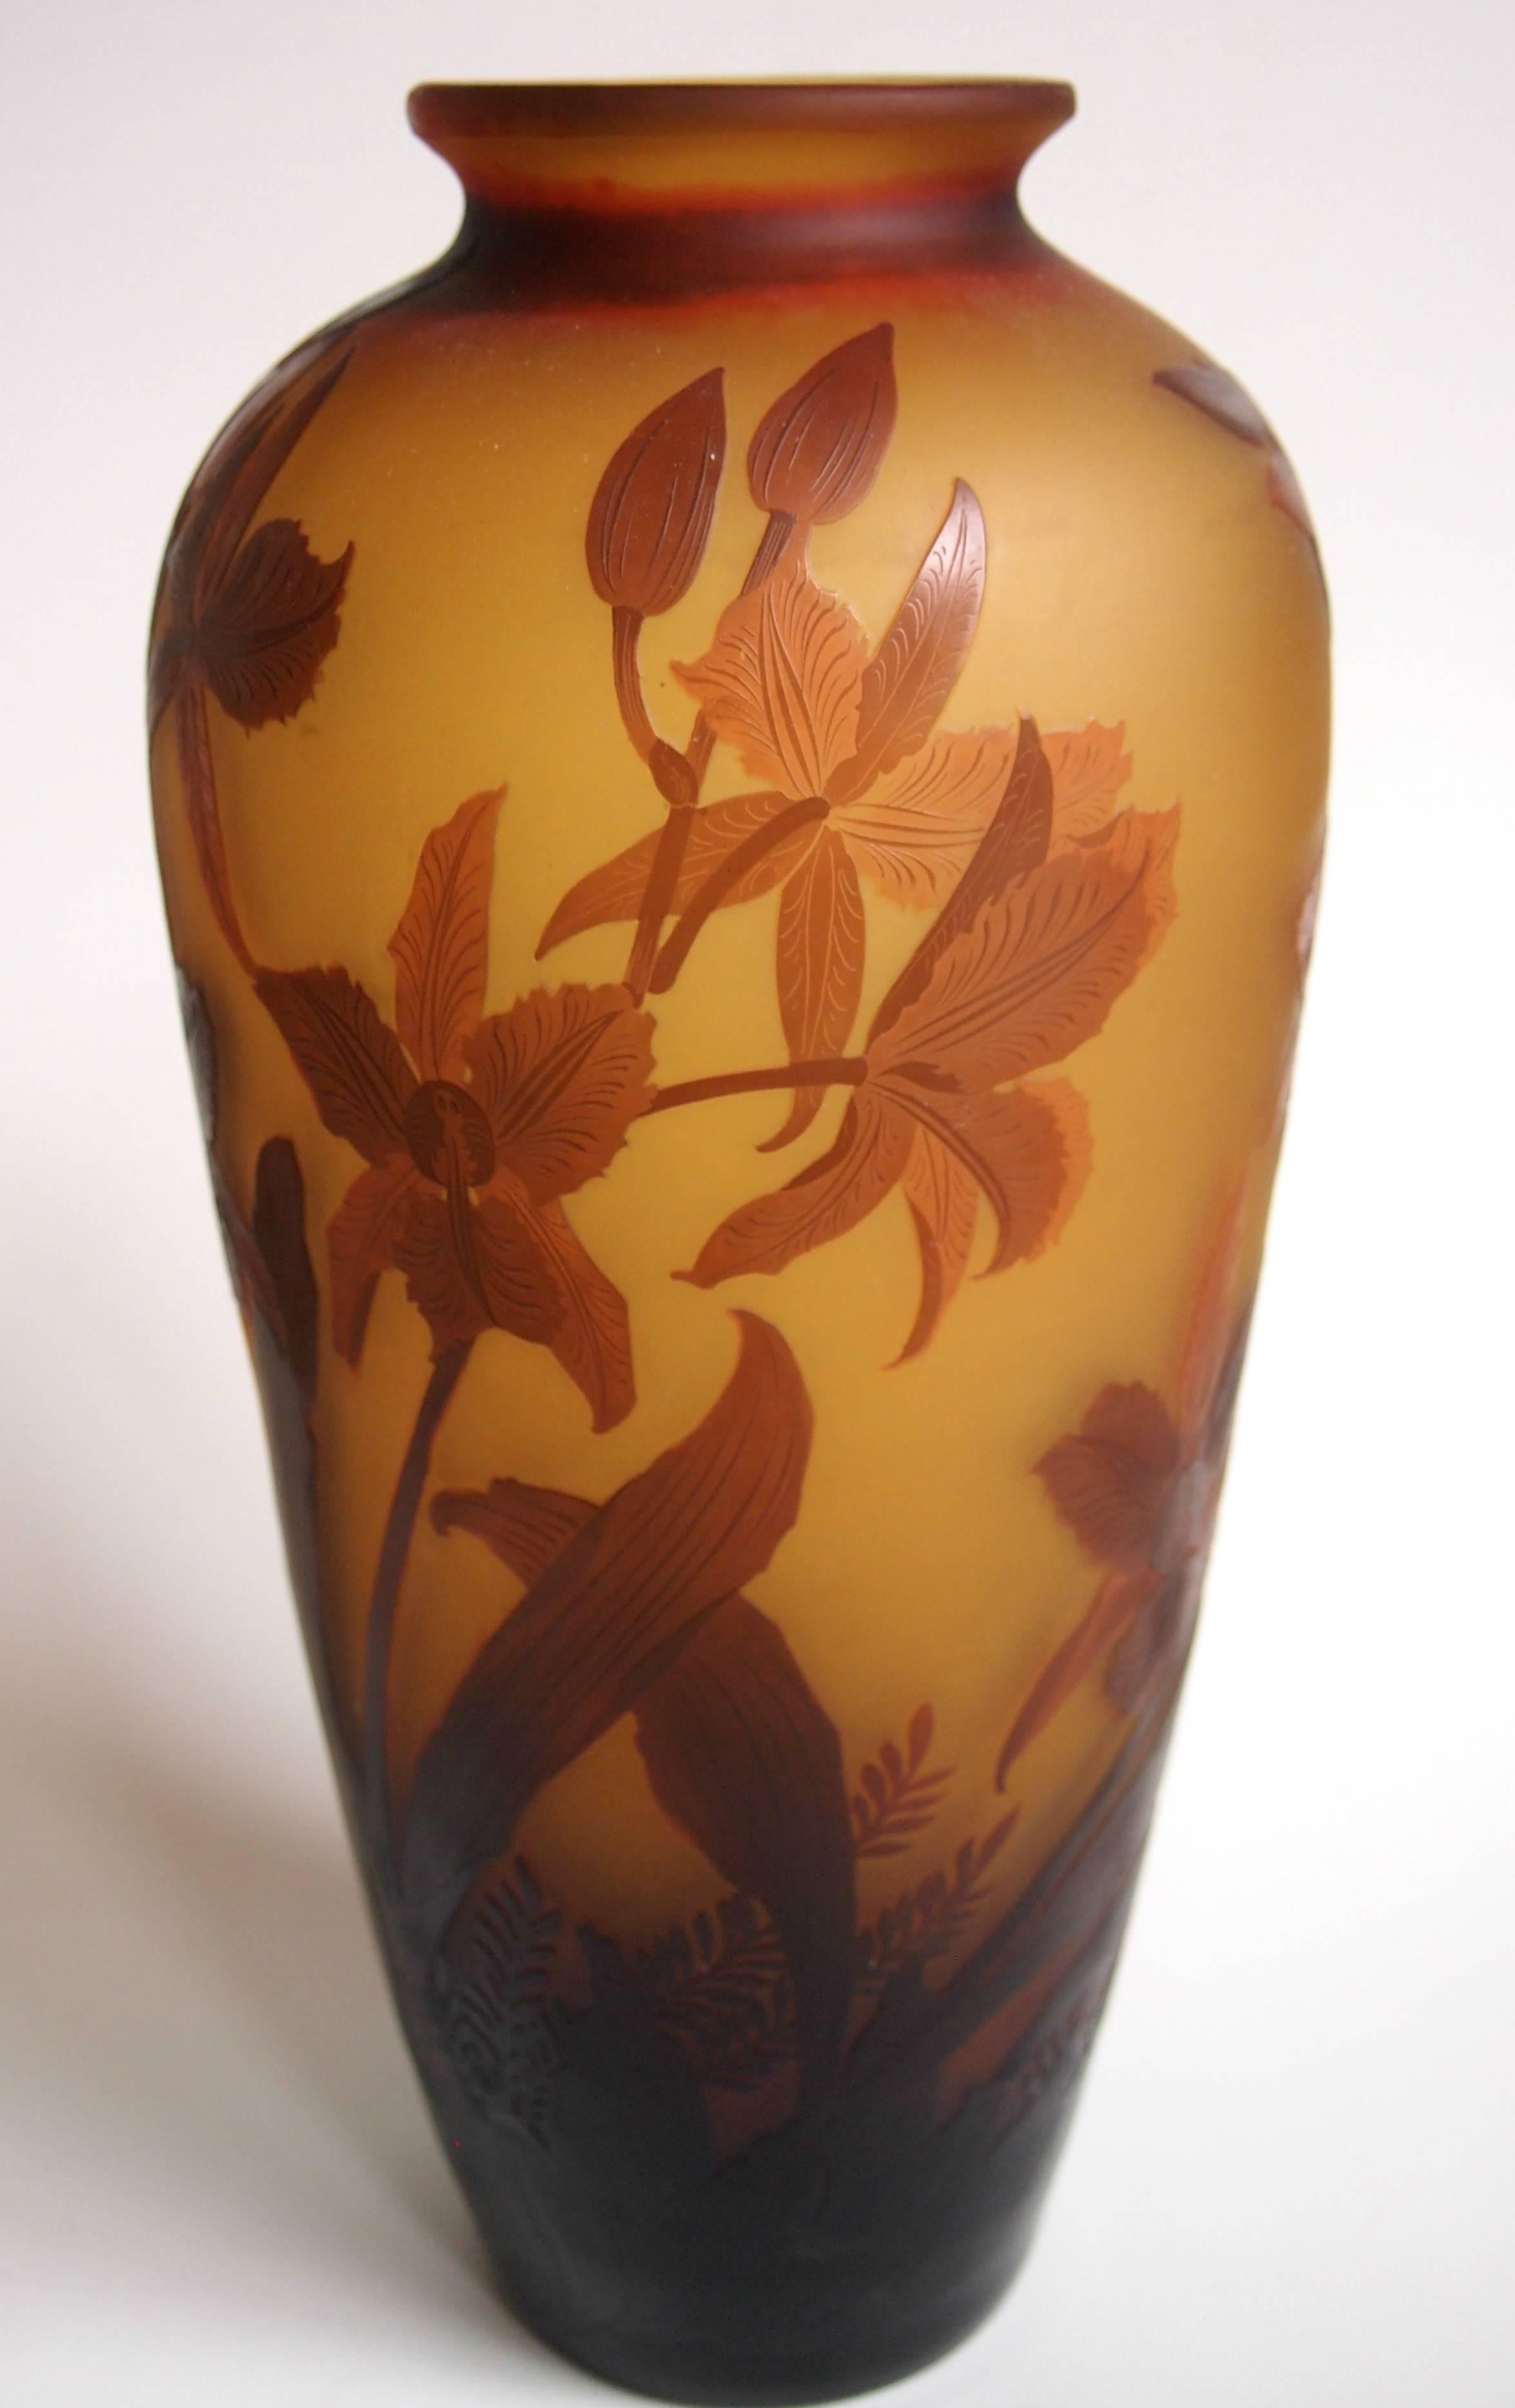 Spectacular large D'Argental Cameo vase made by Paul Nicolas in browns and oranges decorated with beautifully detailed flowering orchids, signed D'Argental - with Cross of Lorraine (see image 5) -the Cross of Lorraine indicates it was personally